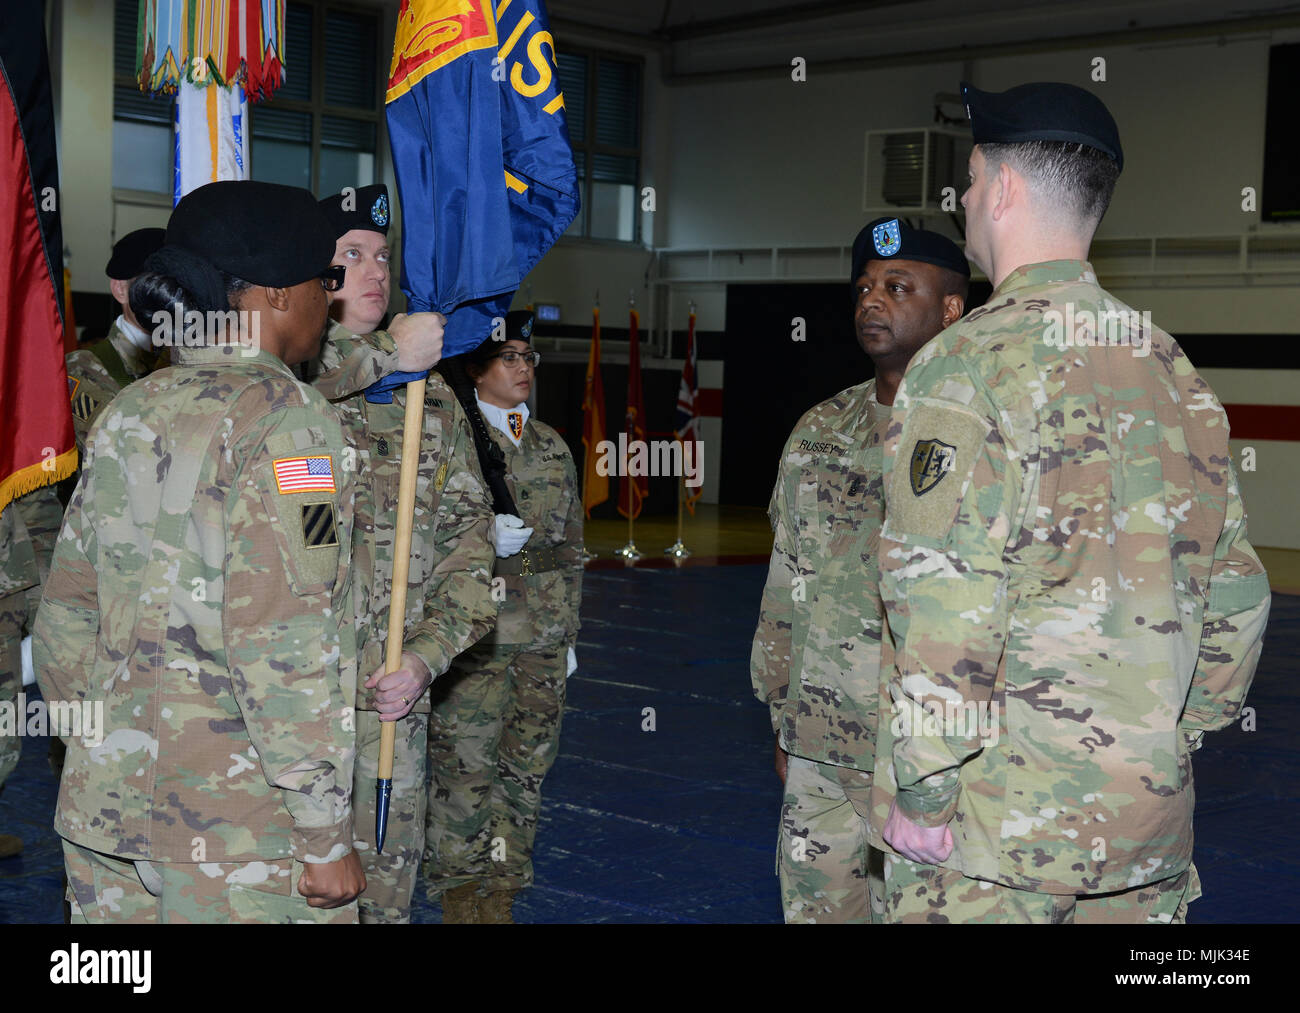 The official party prepares for the passing of the colors at the USANATO Bde., change of responsibility ceremony, December 05, 2017 at Sembach, Germany. (U.S. Army Photo by Visual Information Specialist Elisabeth Paque/Released) Stock Photo